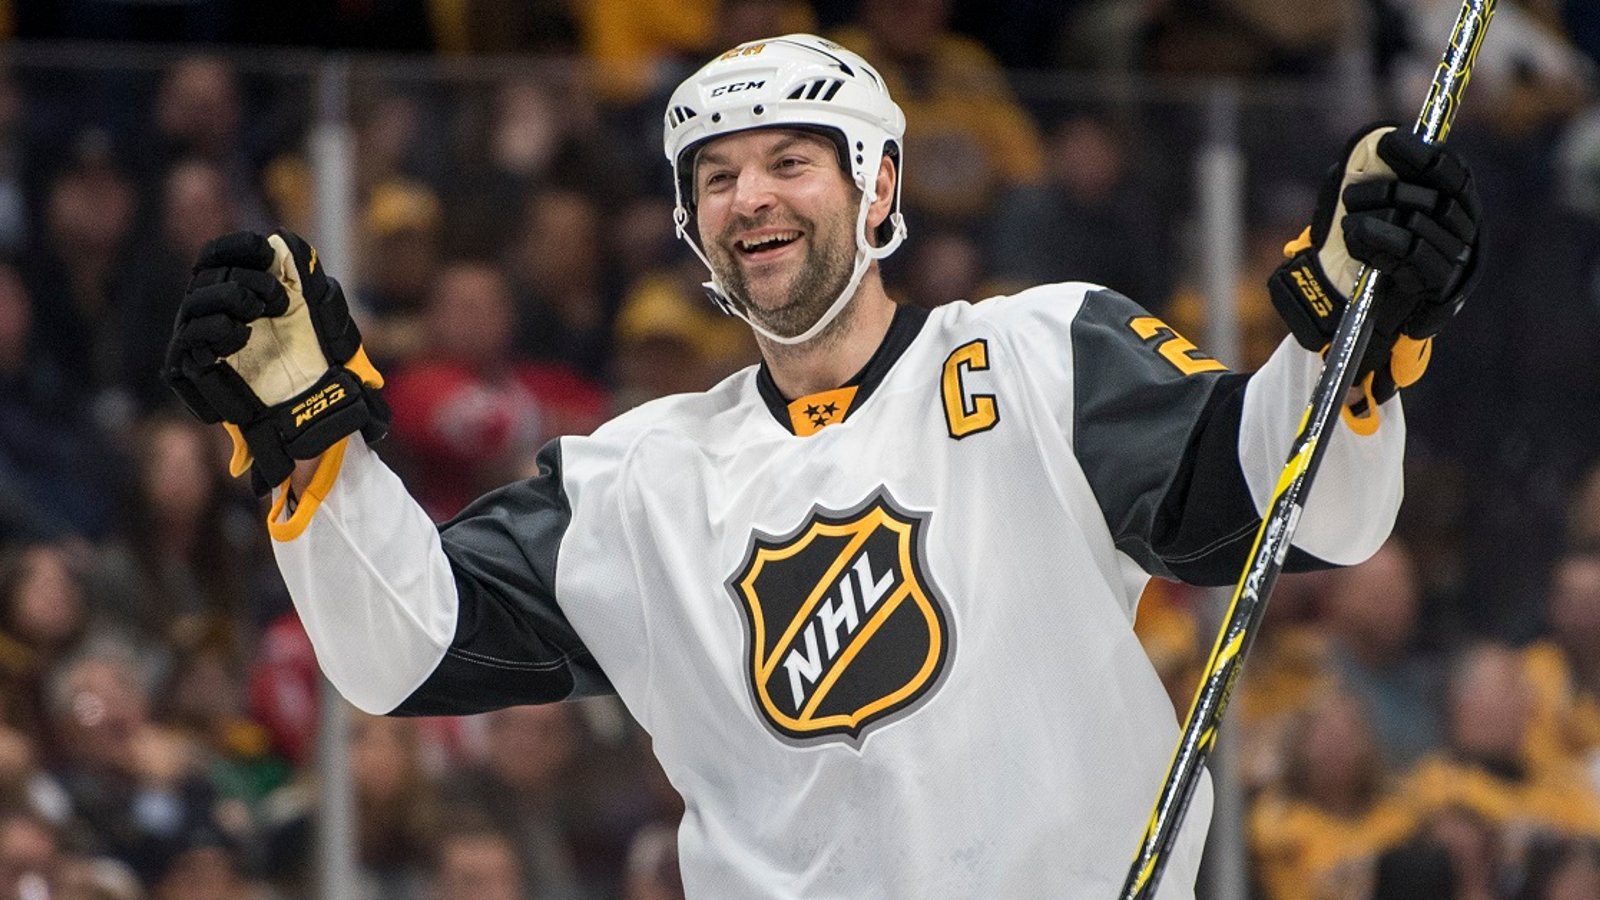 Breaking: John Scott reveals why he called P.K. Subban “a piece of garbage.”